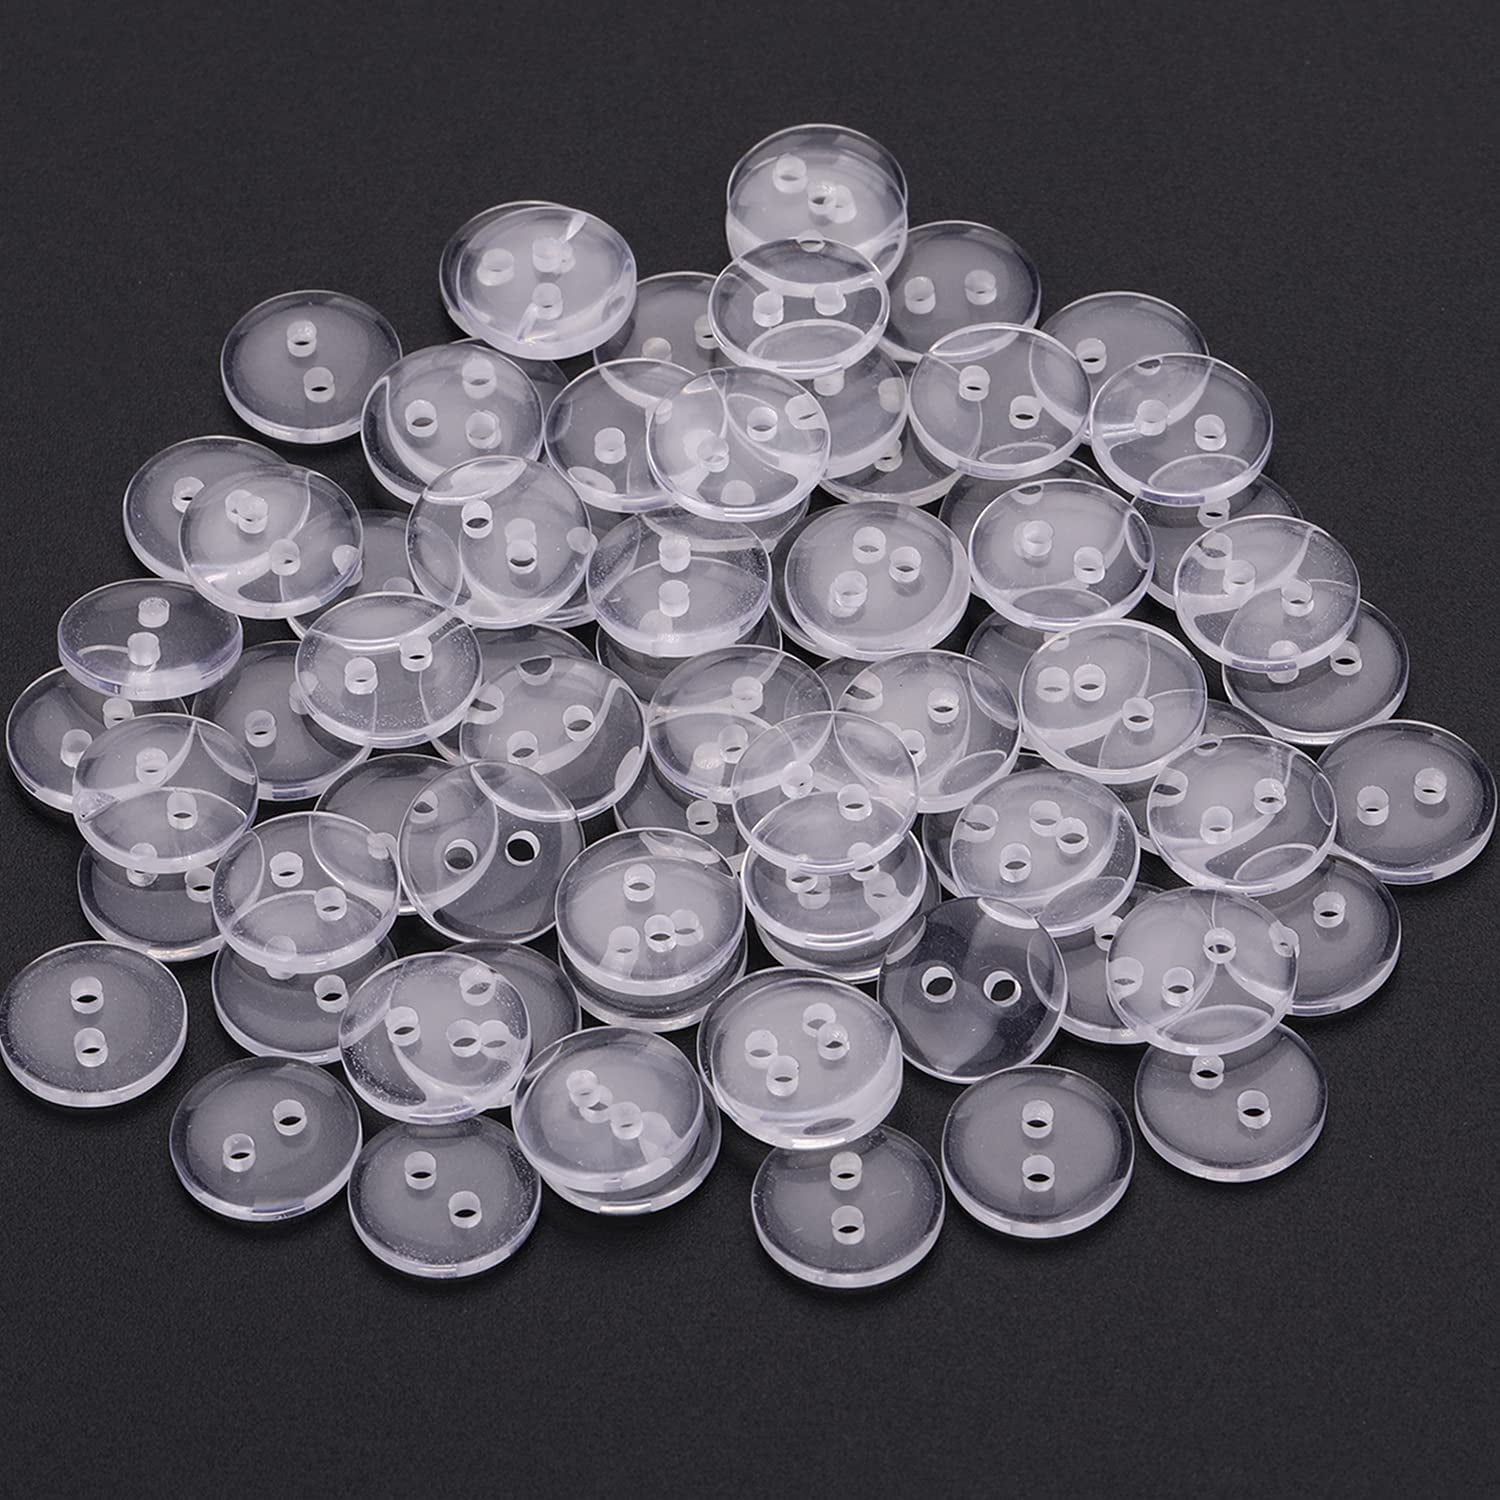 Trimming Shop Round Plastic Buttons 4 Holes for Sewing Clothing